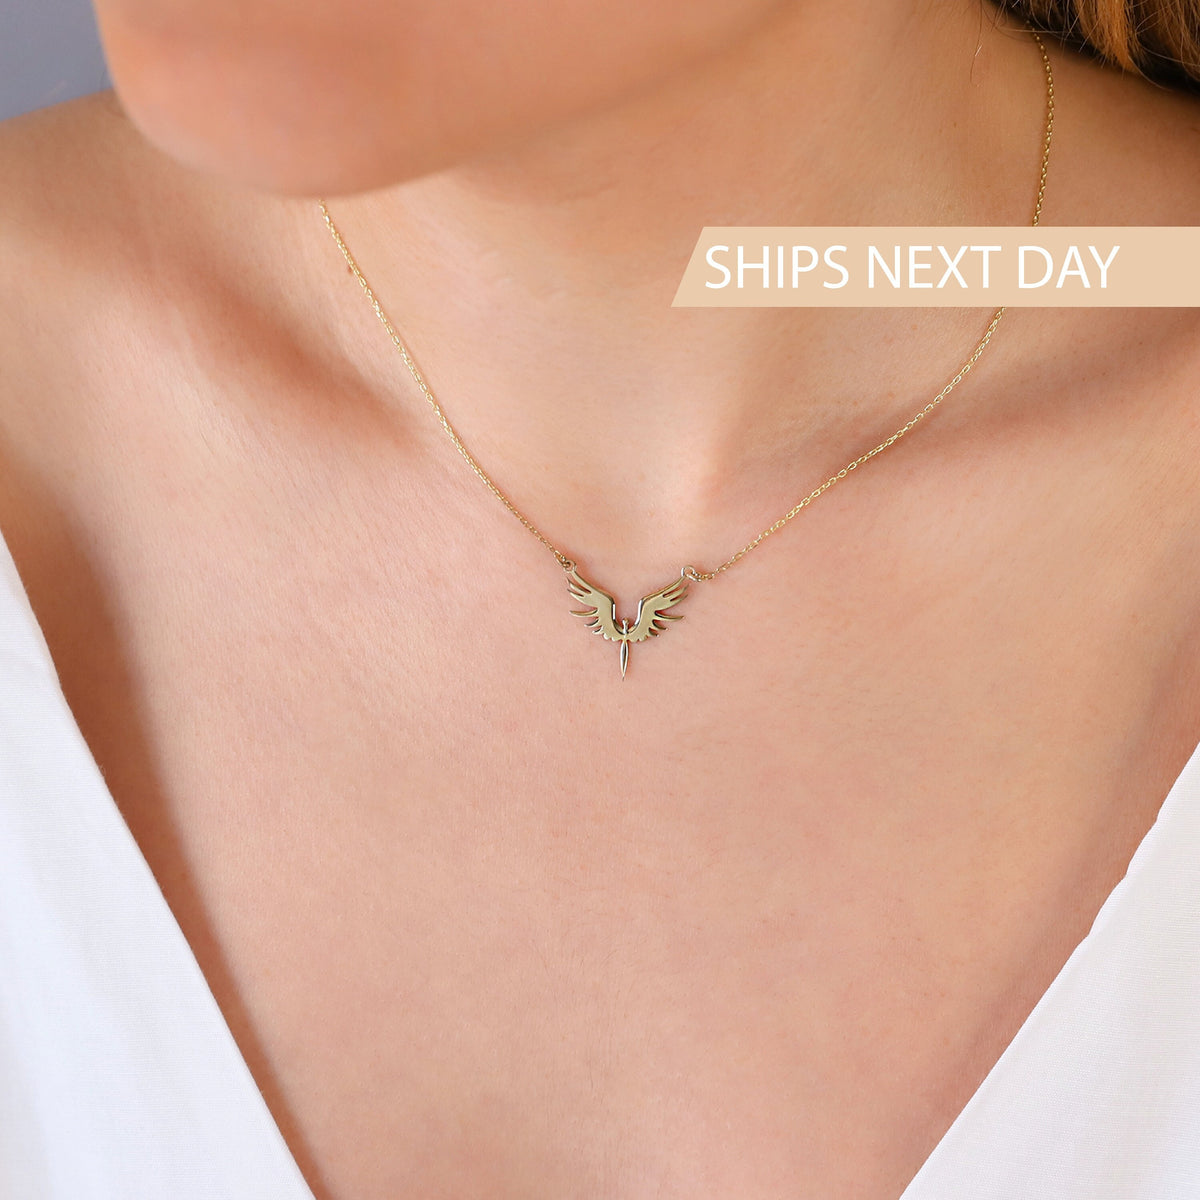 NECKLACE: Ready to Ship